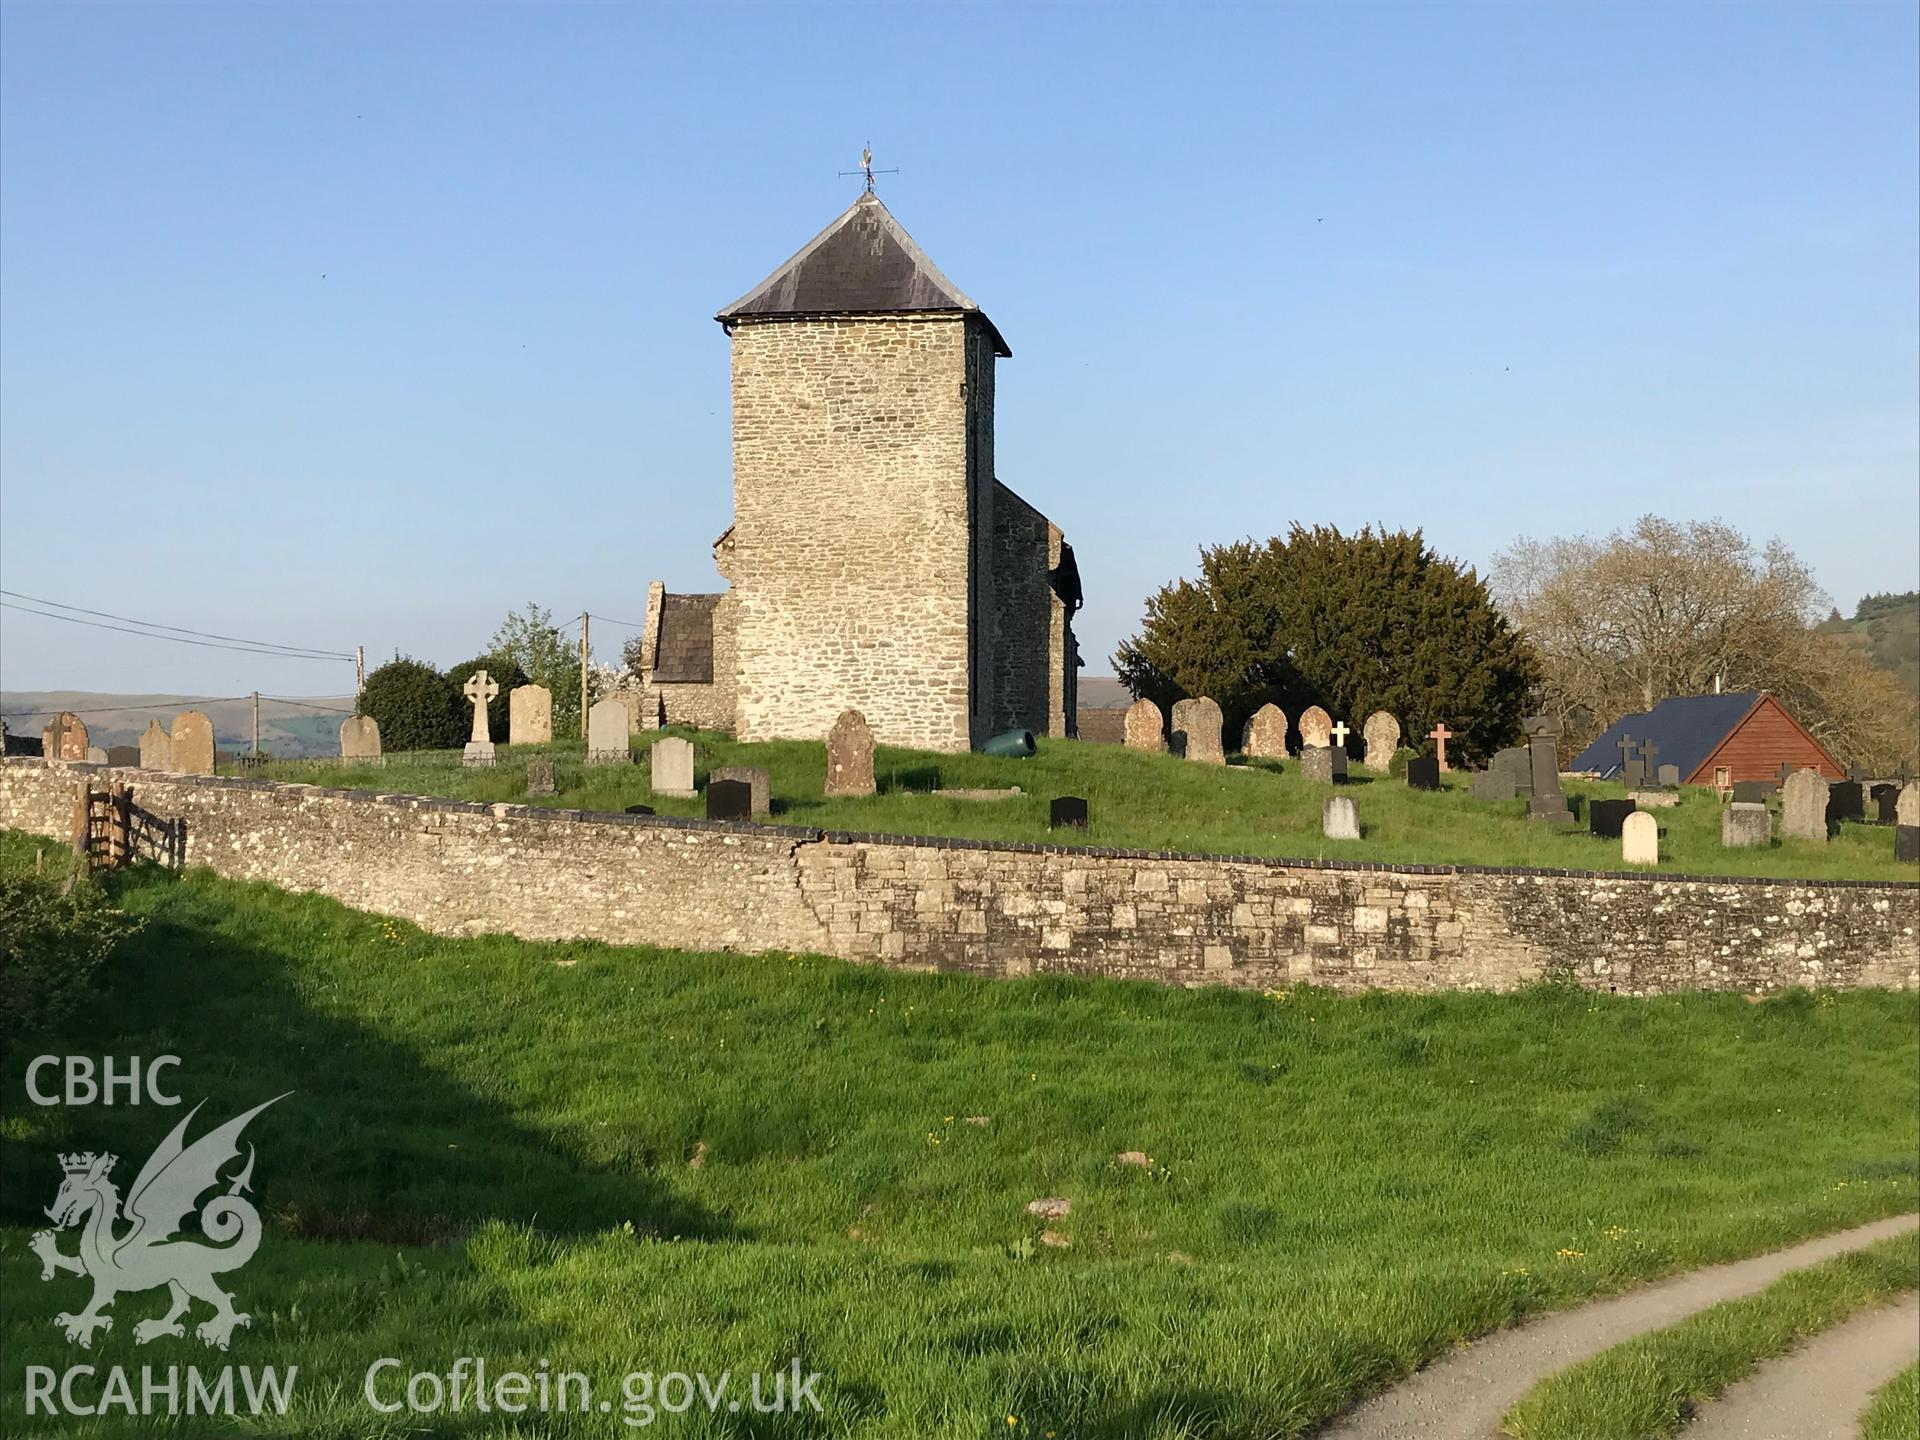 Colour photo showing exterior view of the St. David's church and associated graveyard, Llanddewi'r Cwm, taken by Paul R. Davis, 7th May 2018.